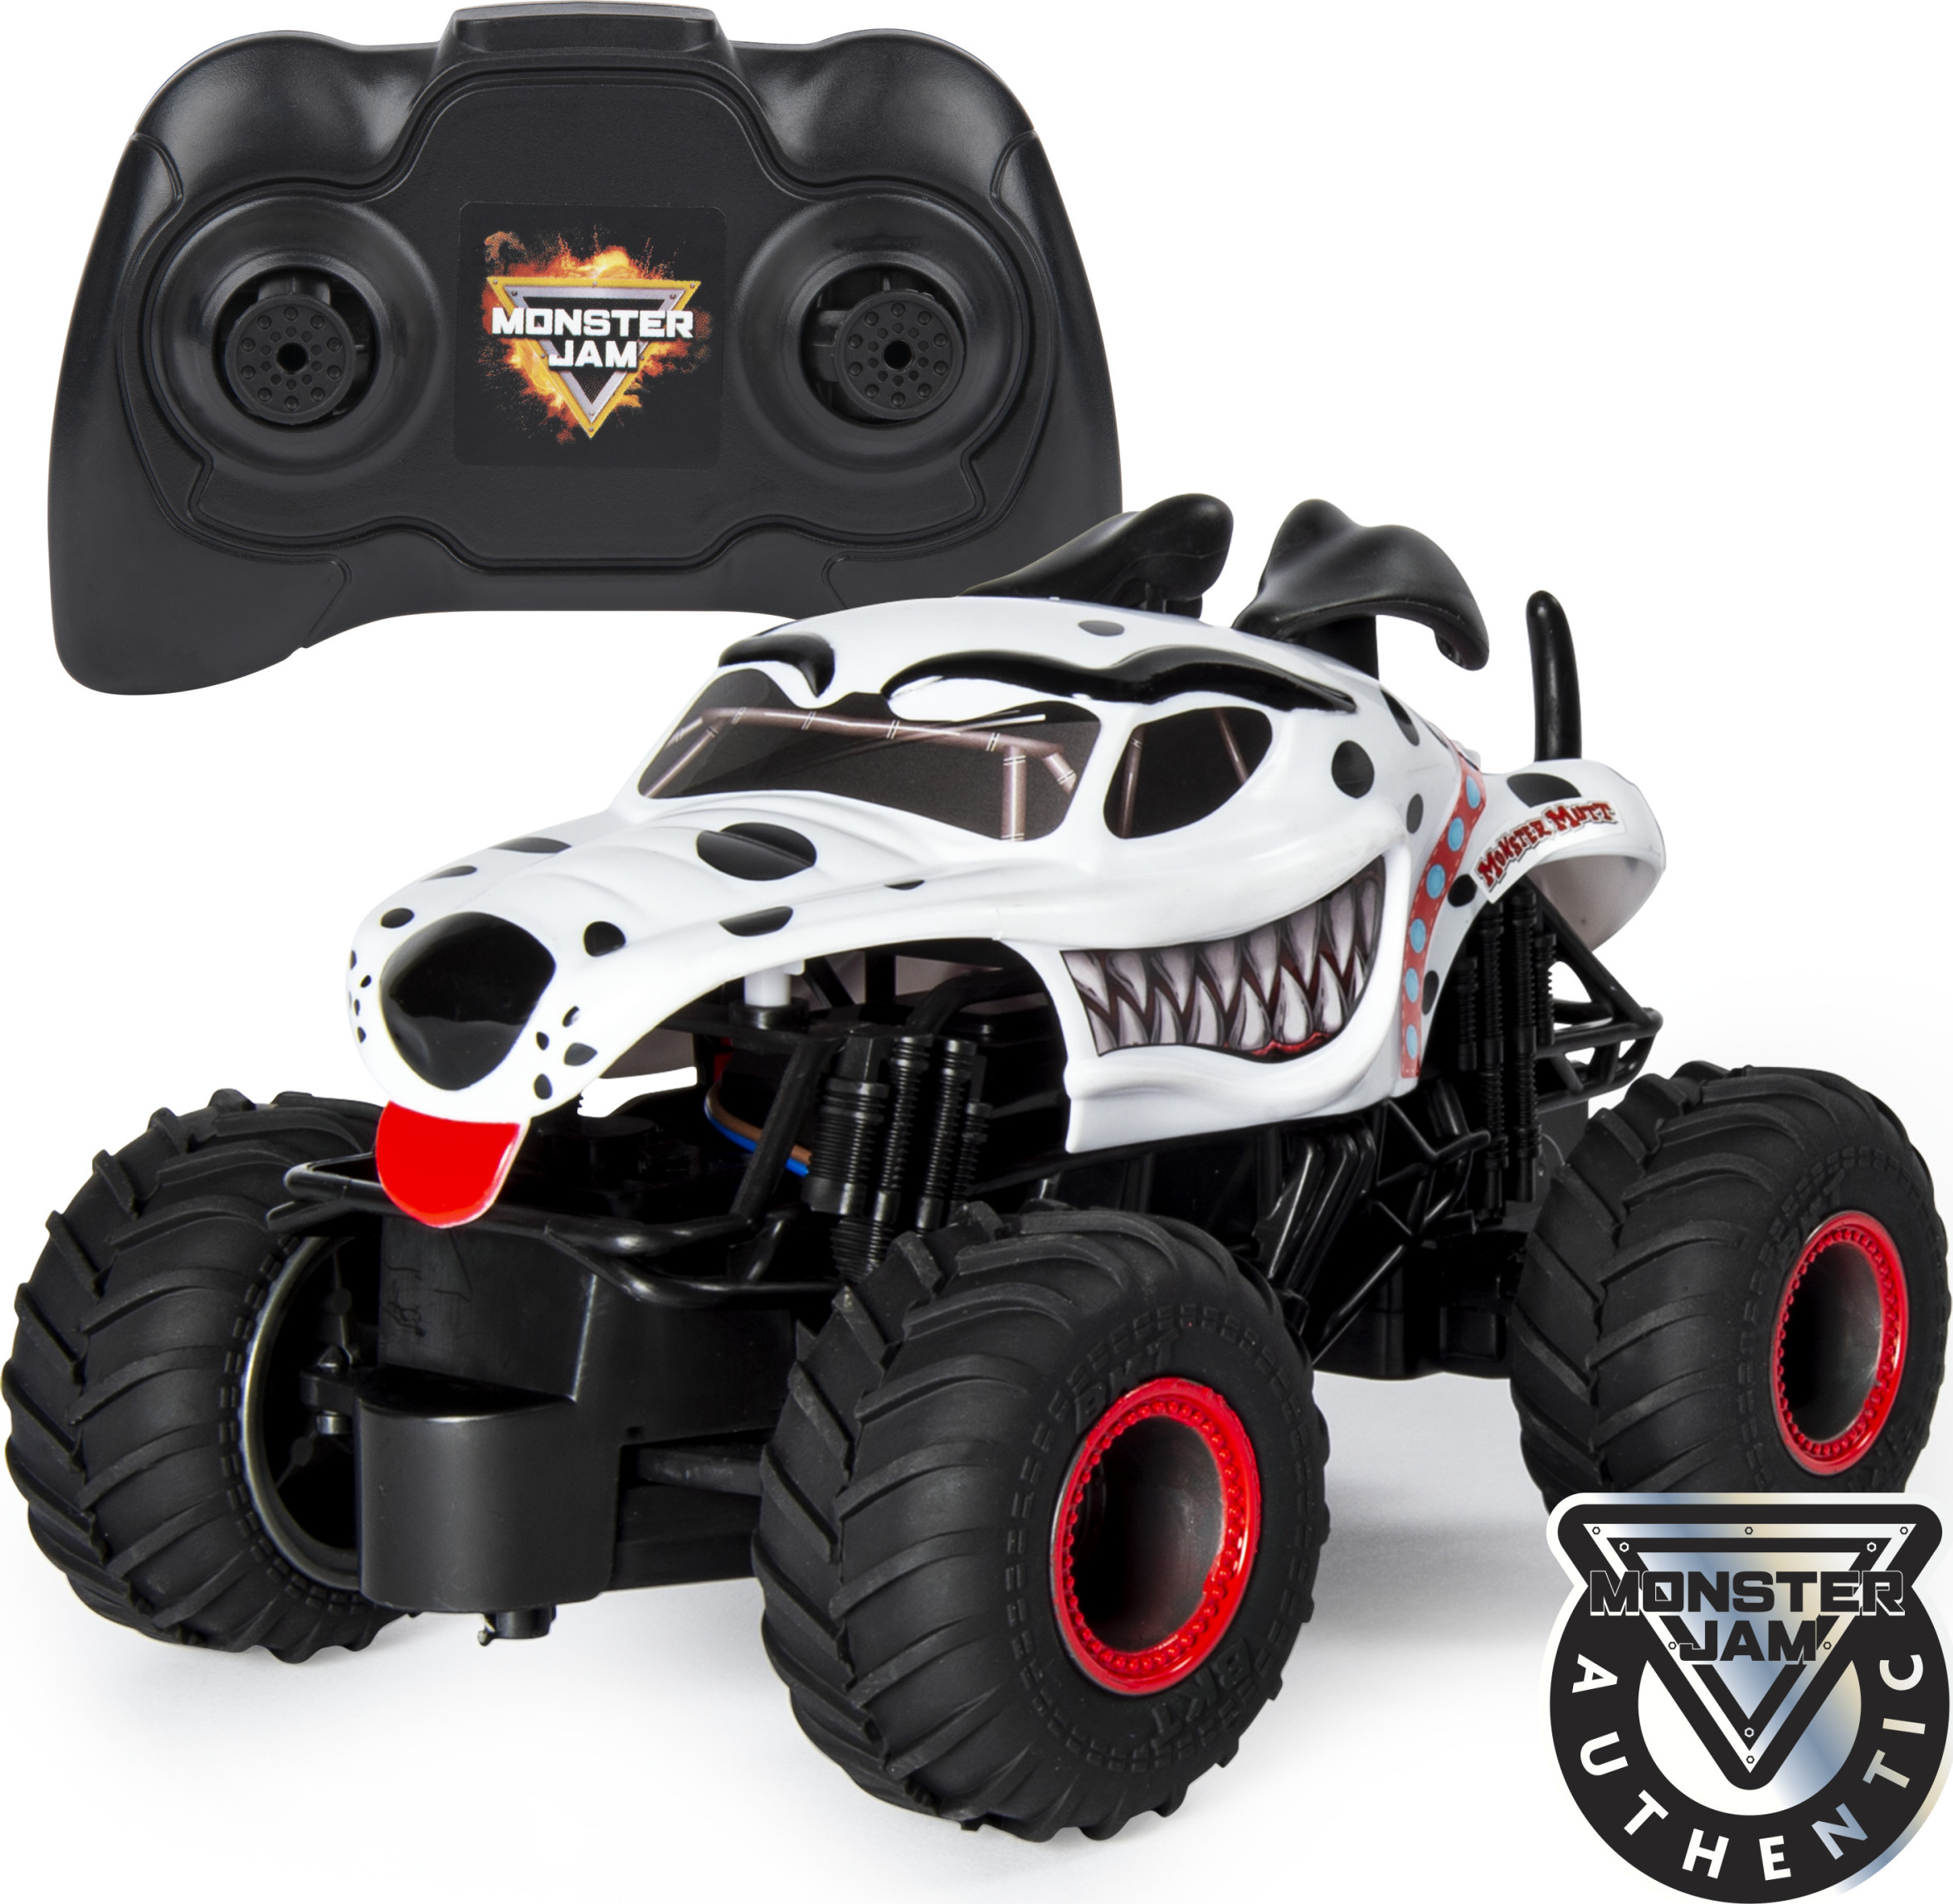 Monster Jam, Official Monster Mutt Dalmatian Remote Control Monster Truck, 1:24 Scale, 2.4 GHz, for Ages 4 and Up - image 1 of 6